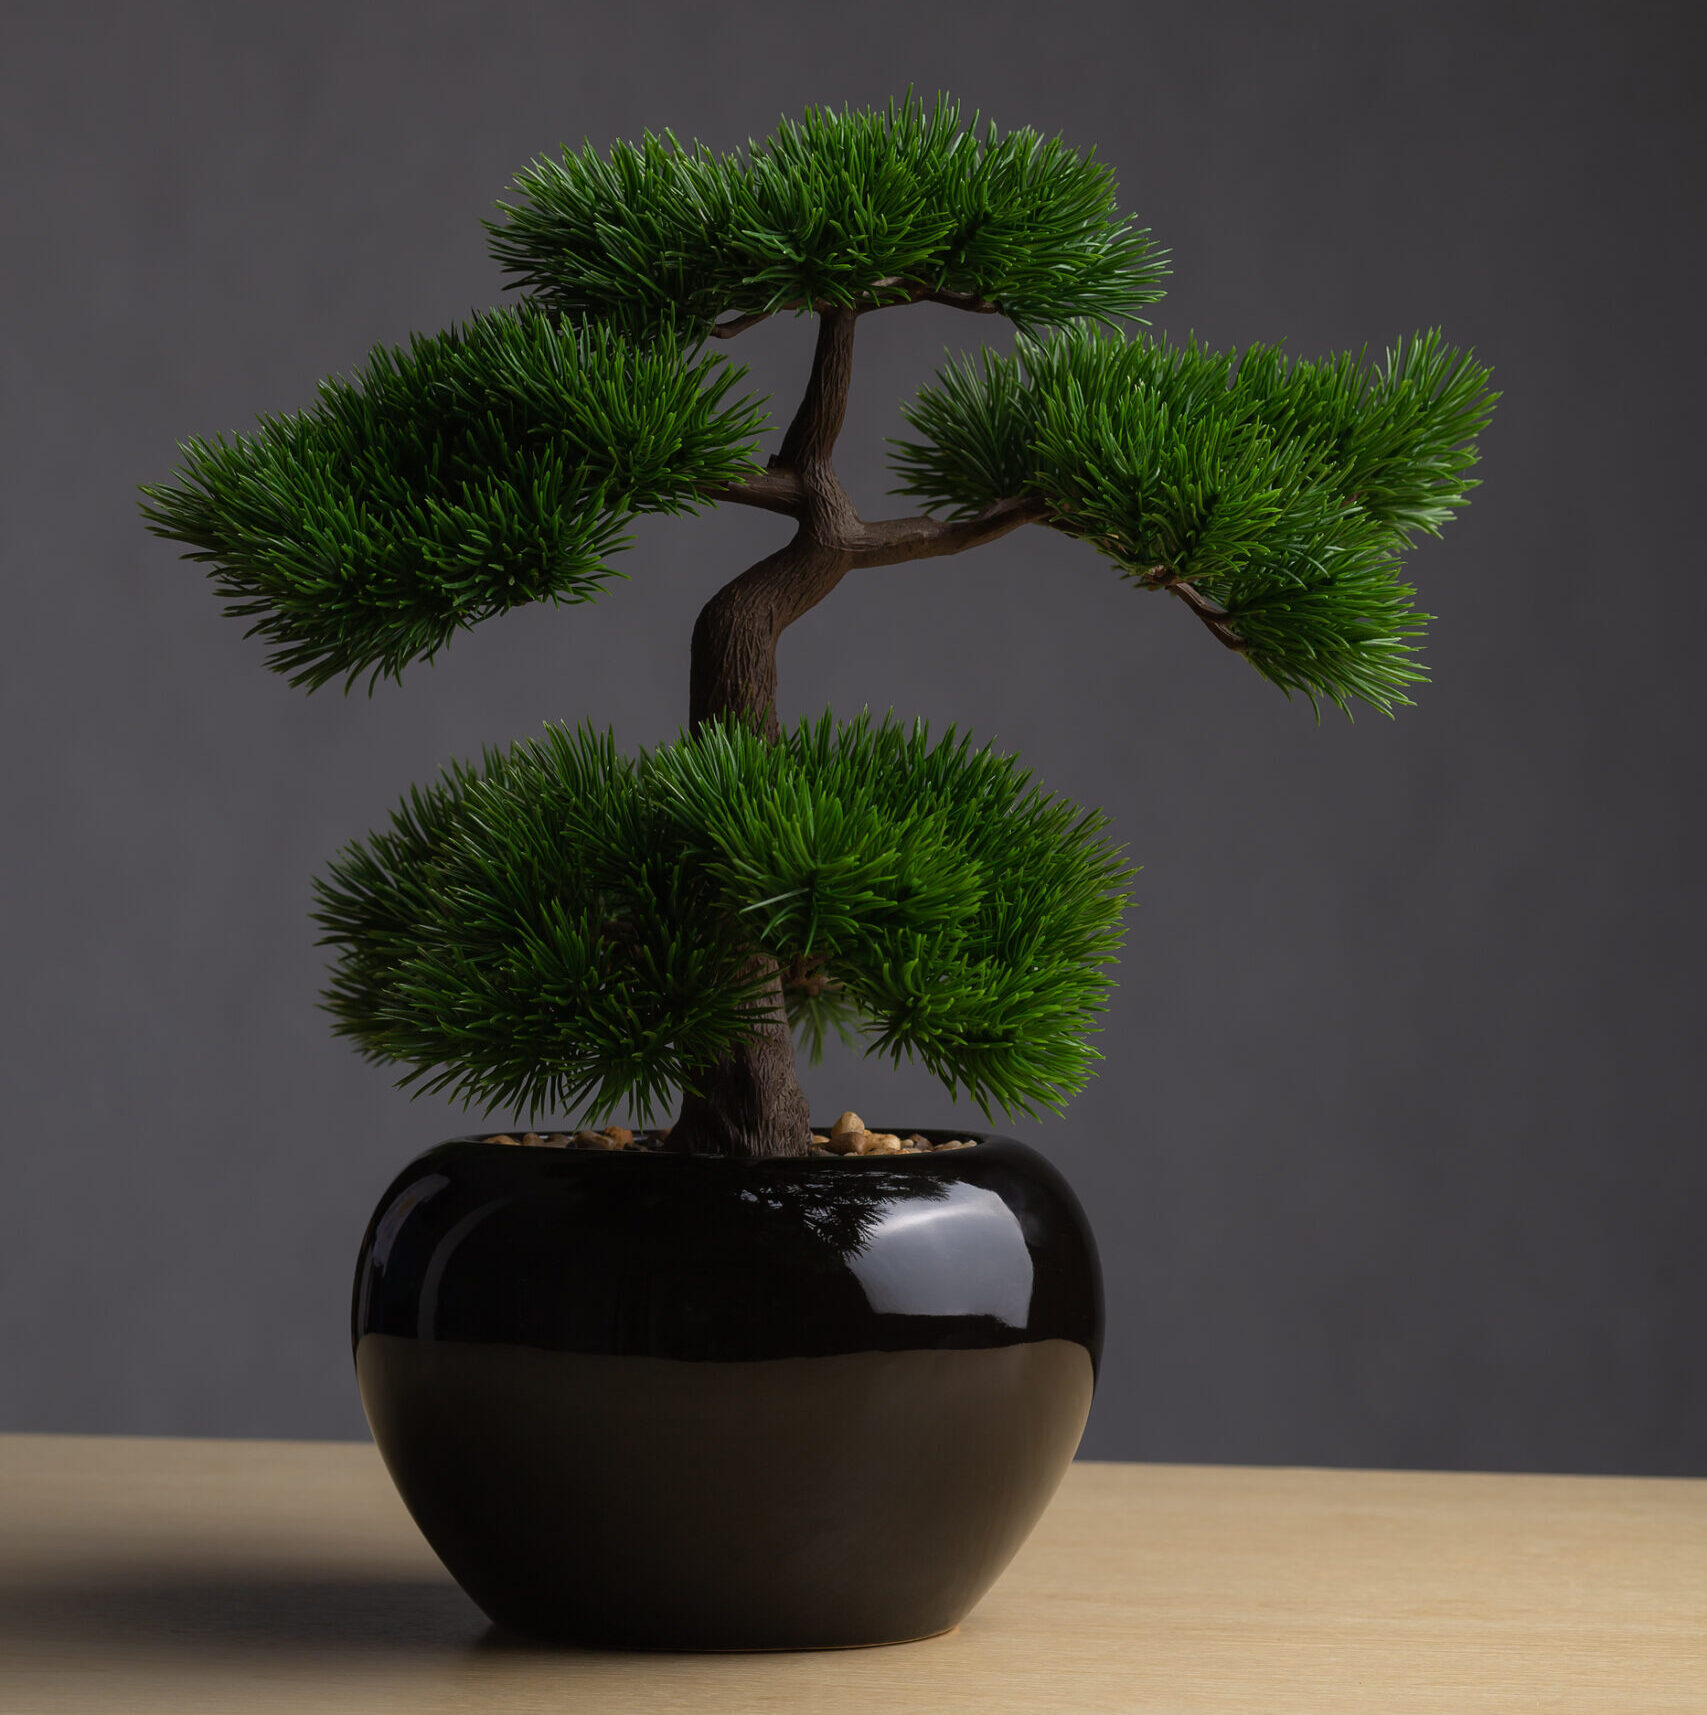 Bonsai On The Desk. The Backdrop Is A Dark Gray Background. The Bonsai Concept Adorned The Desk To R